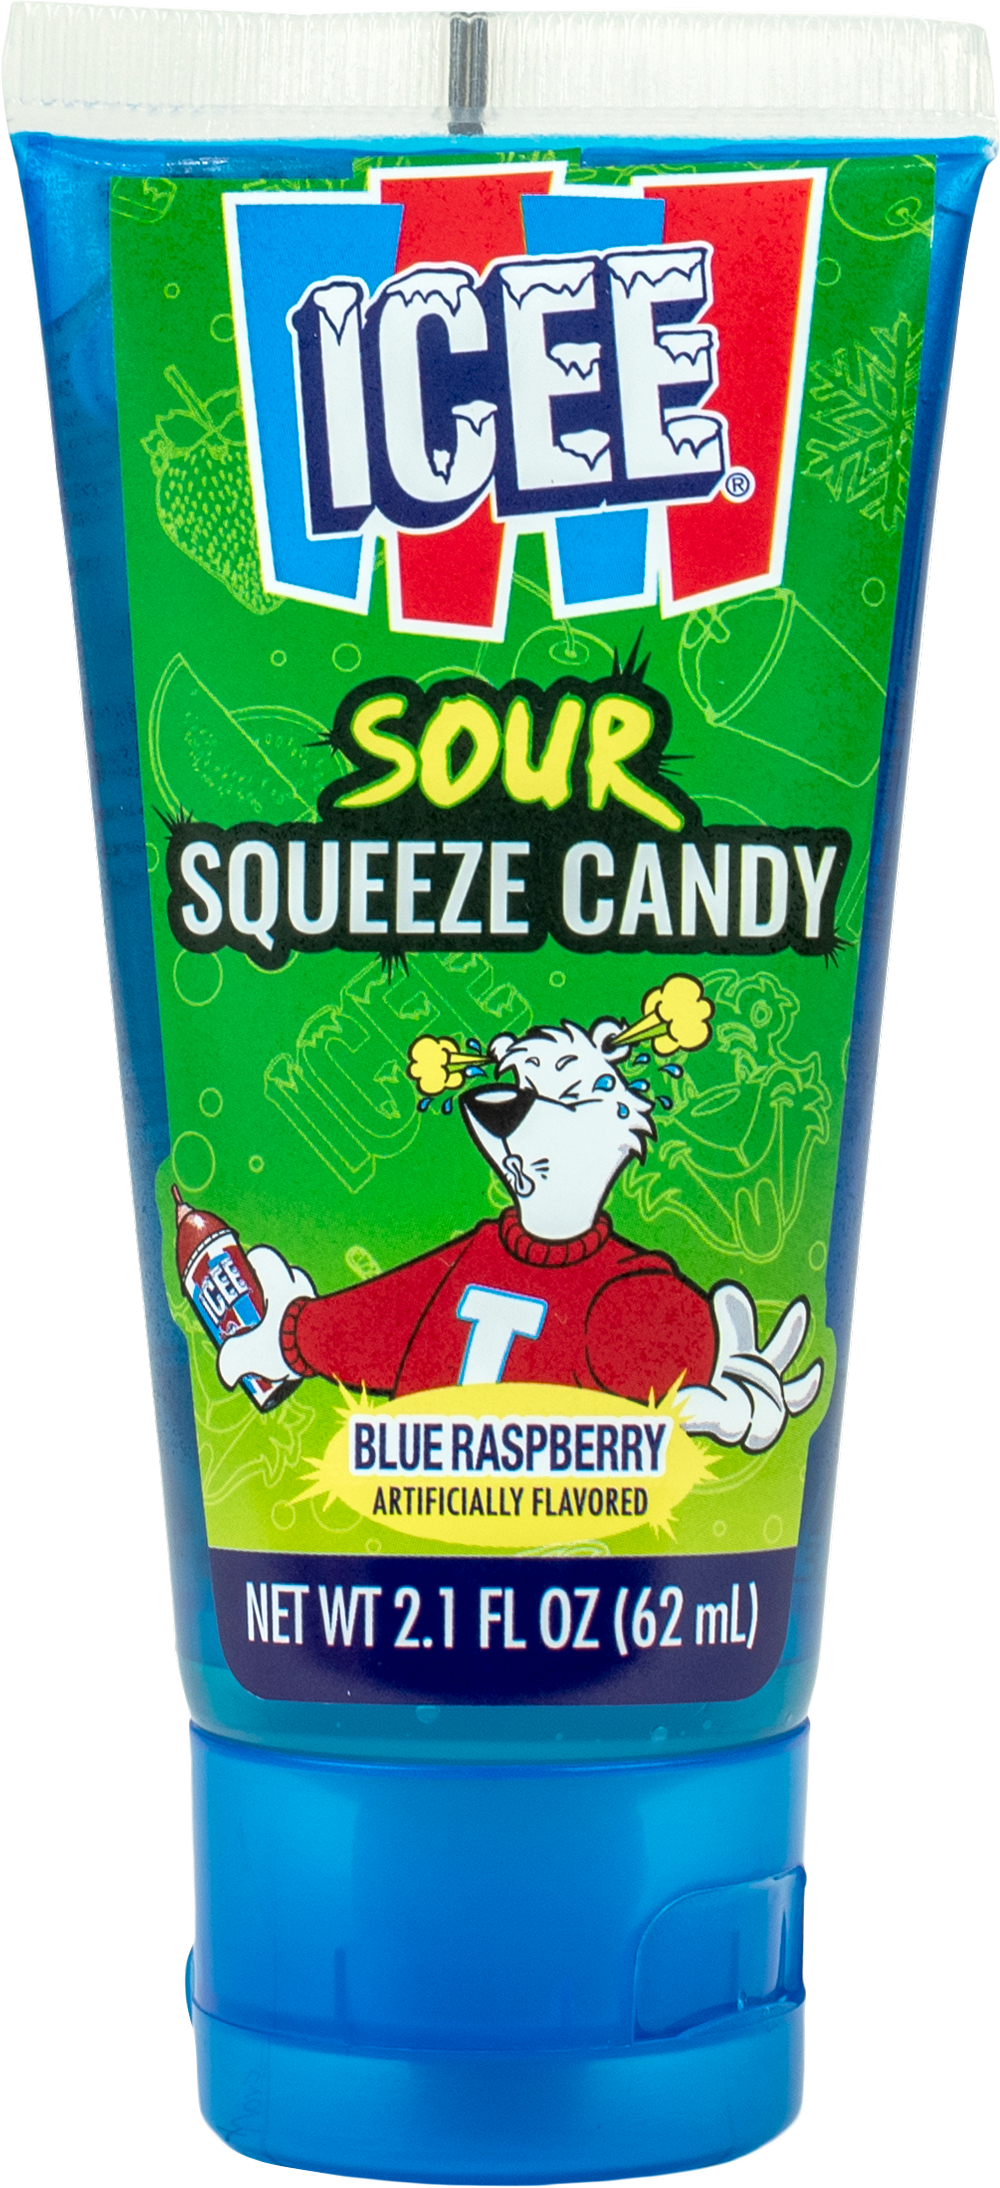 https://exclusivebrands.ca/wp-content/uploads/2022/06/product-novelty-62704-Unit-ICEE-Sour-Squeeze-1.png